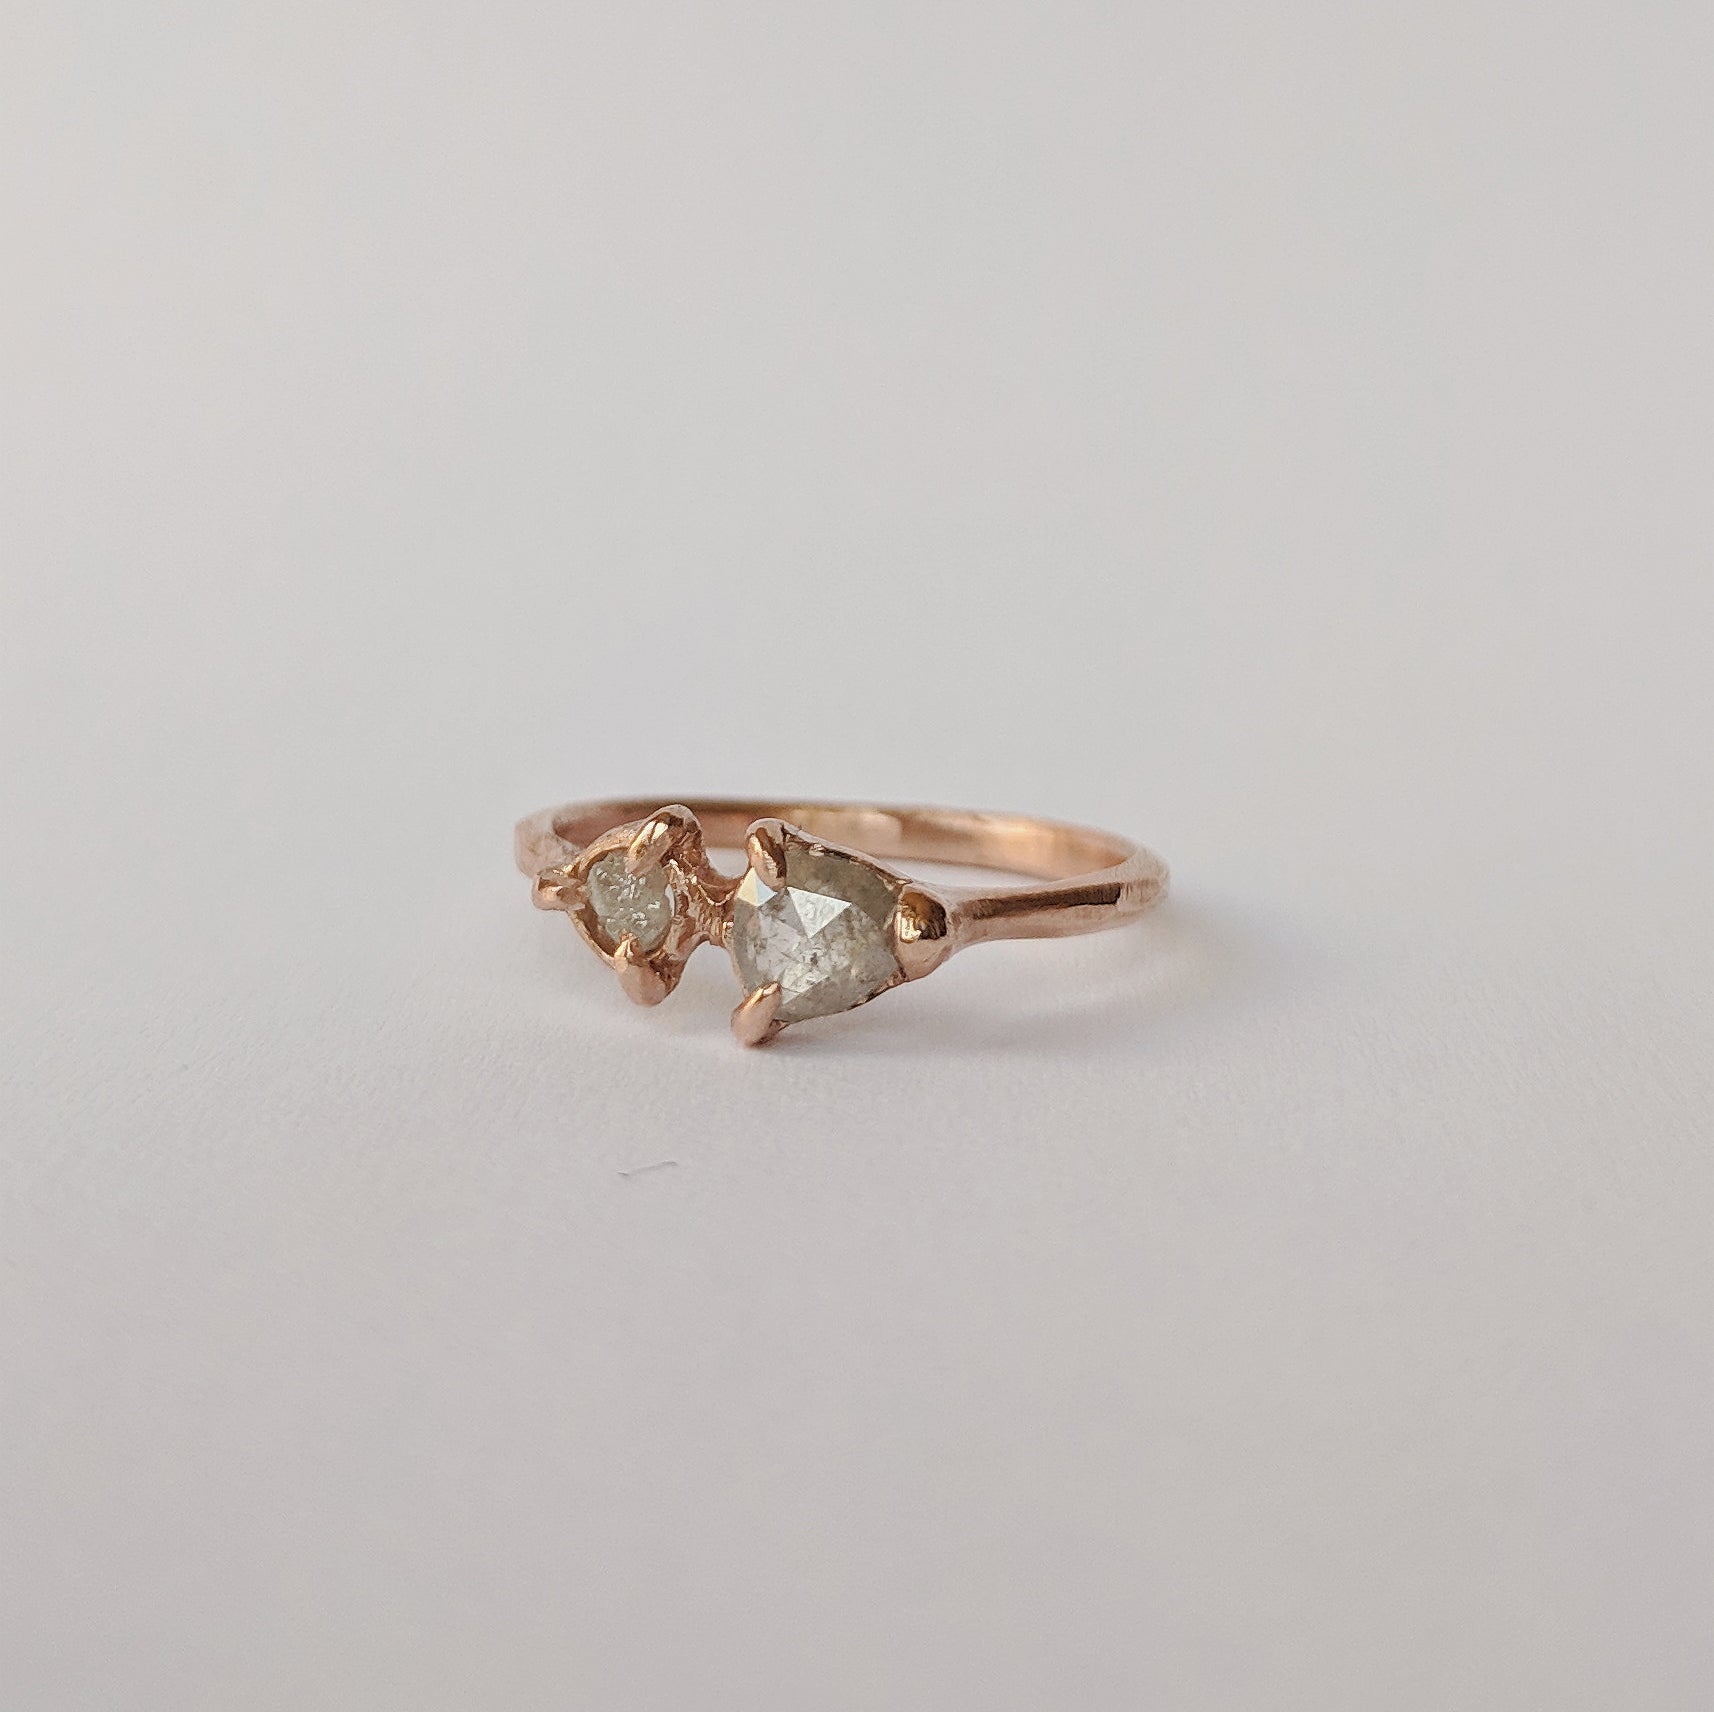 Rough and refined diamond ring, rose gold